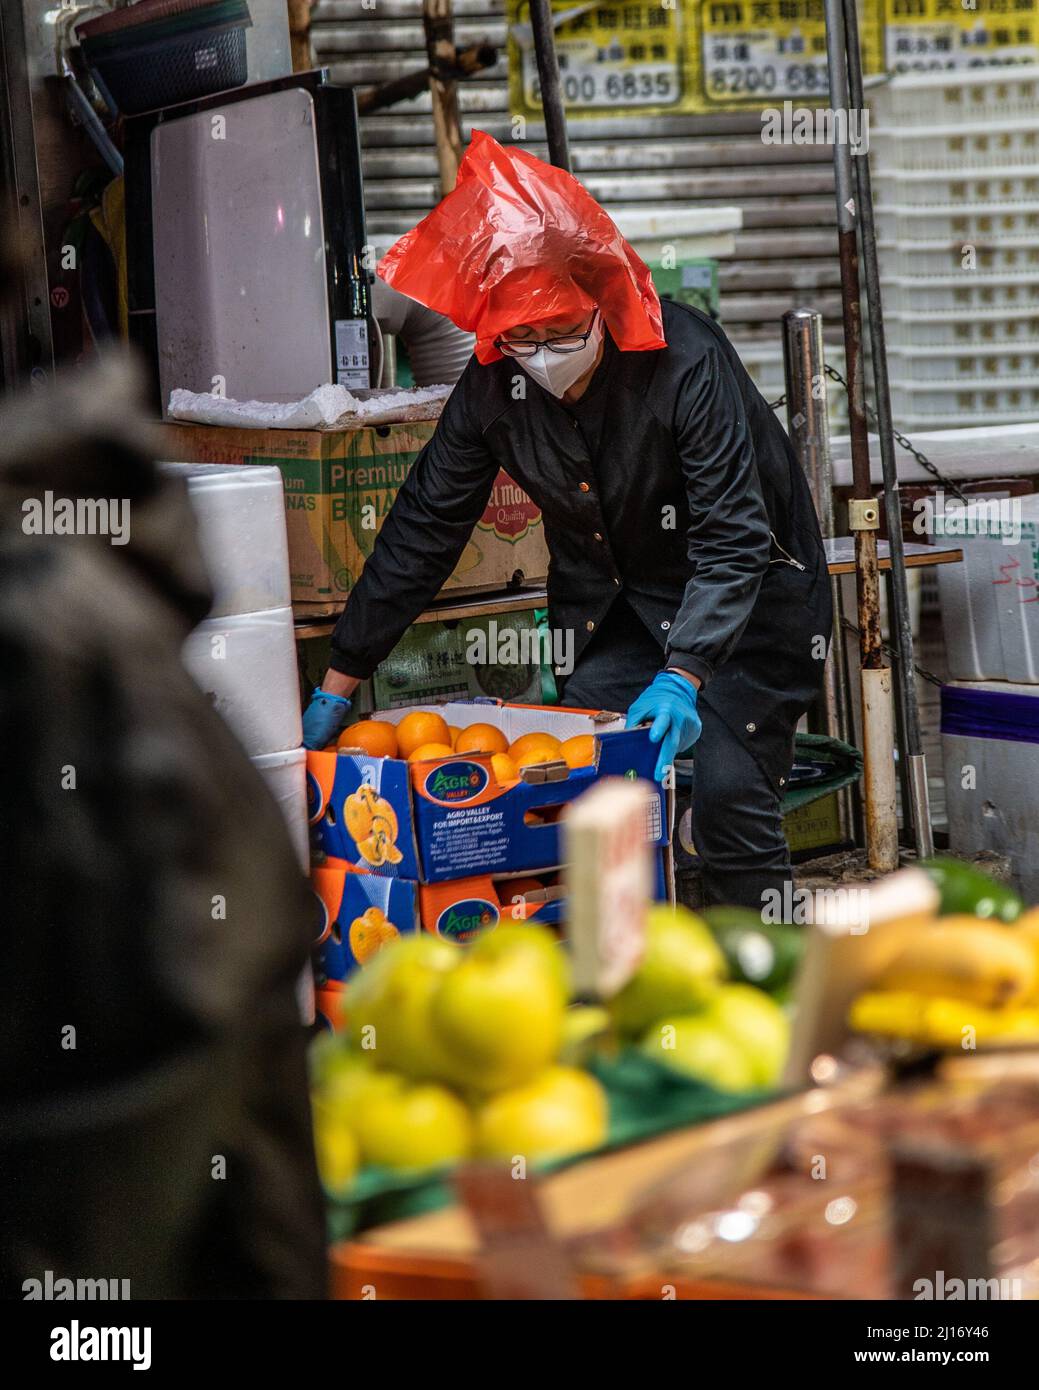 A worker wearing a plastic bag for a hat to protect him from the rain,  loads fruits as a northern monsoon brings cooler weather and rain to Hong  Kong. A rainy, spring